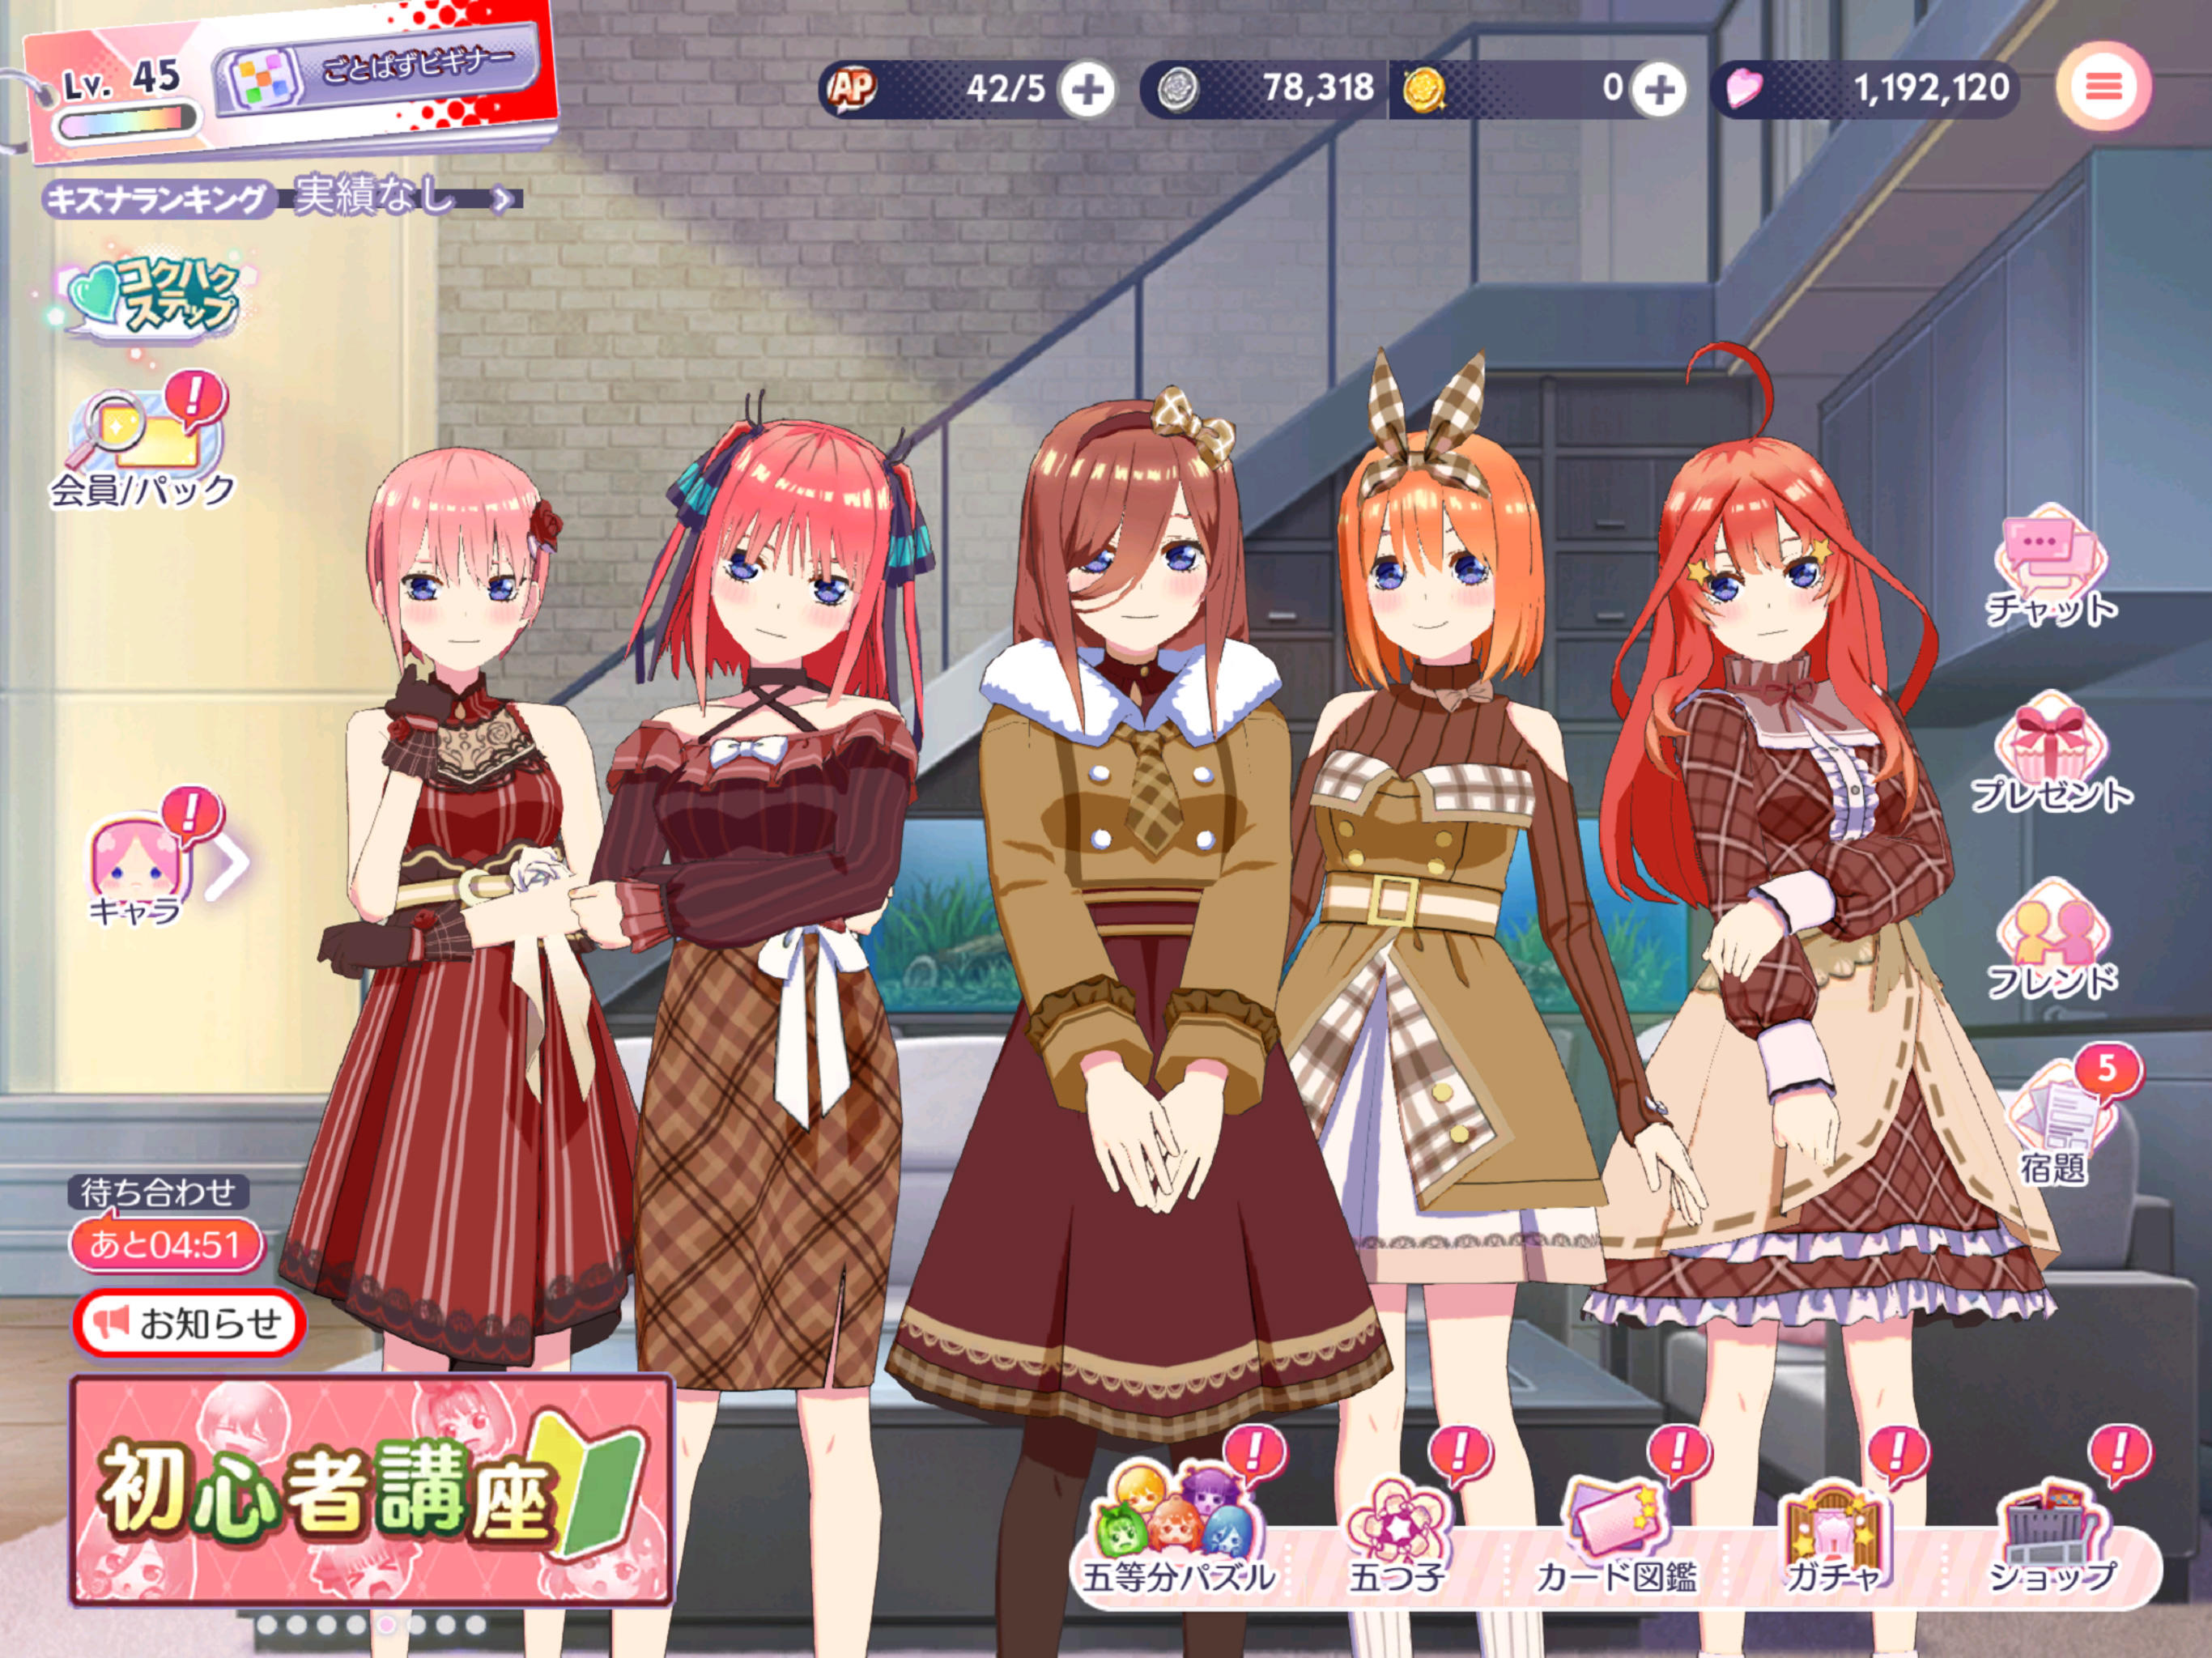 The Quintessential Quintuplets: The Quintuplets Can't Divide the Puzzle  Into Five Equal Parts